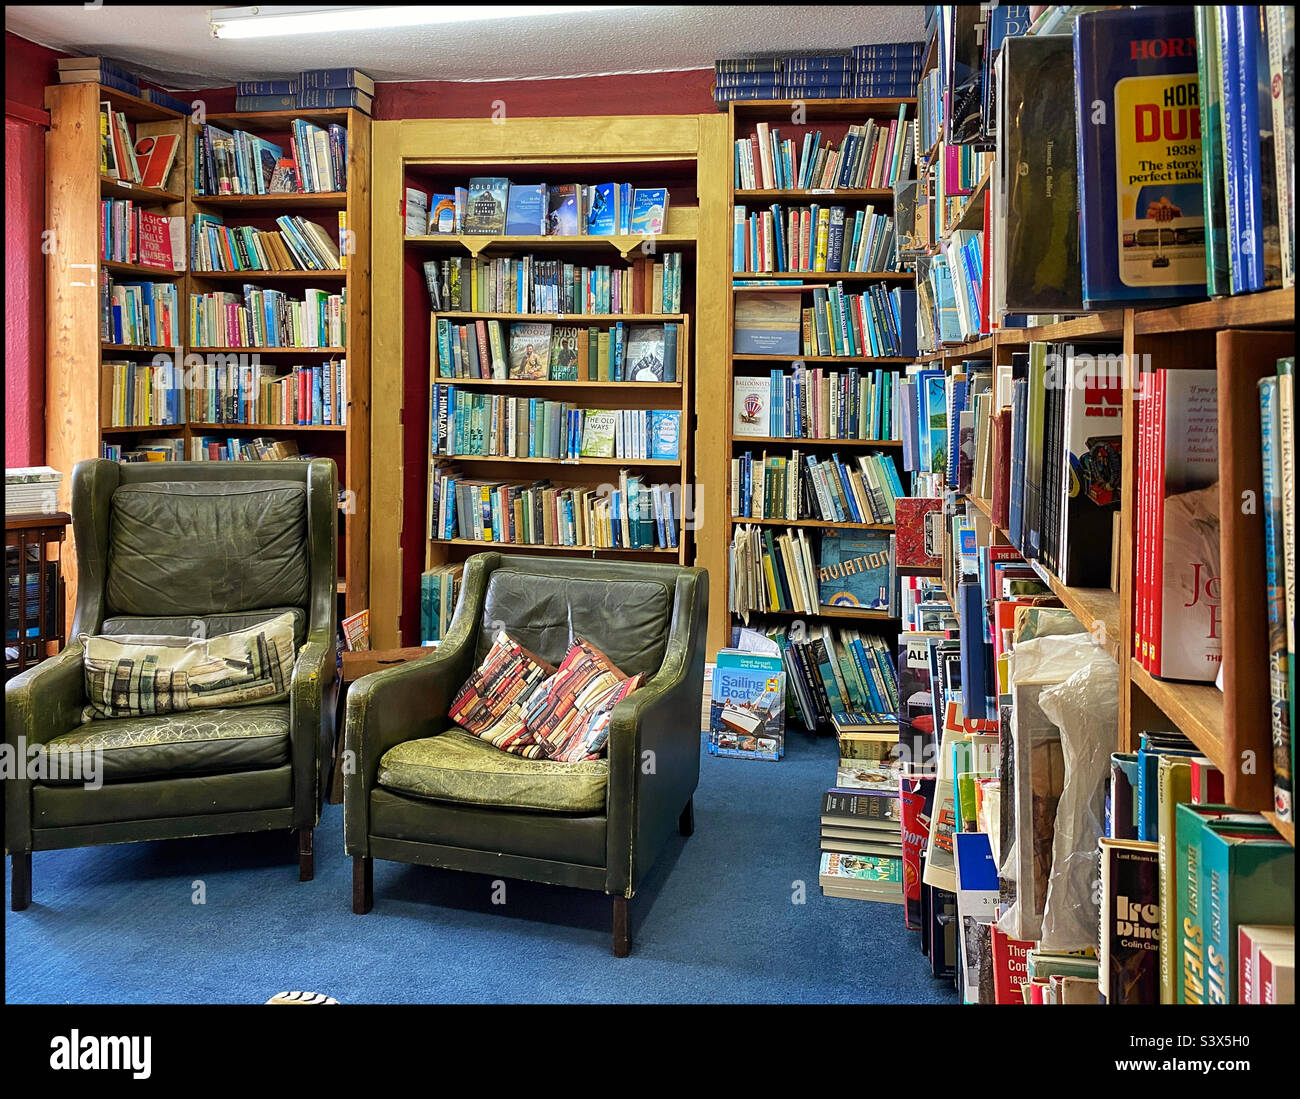 The interior of one of the many book stores in the border town of Hay-on-Wye in the U.K. The town is world renowned for having many book shops as well as it’s annual Literary Festival. Photo ©️ C.H. Stock Photo